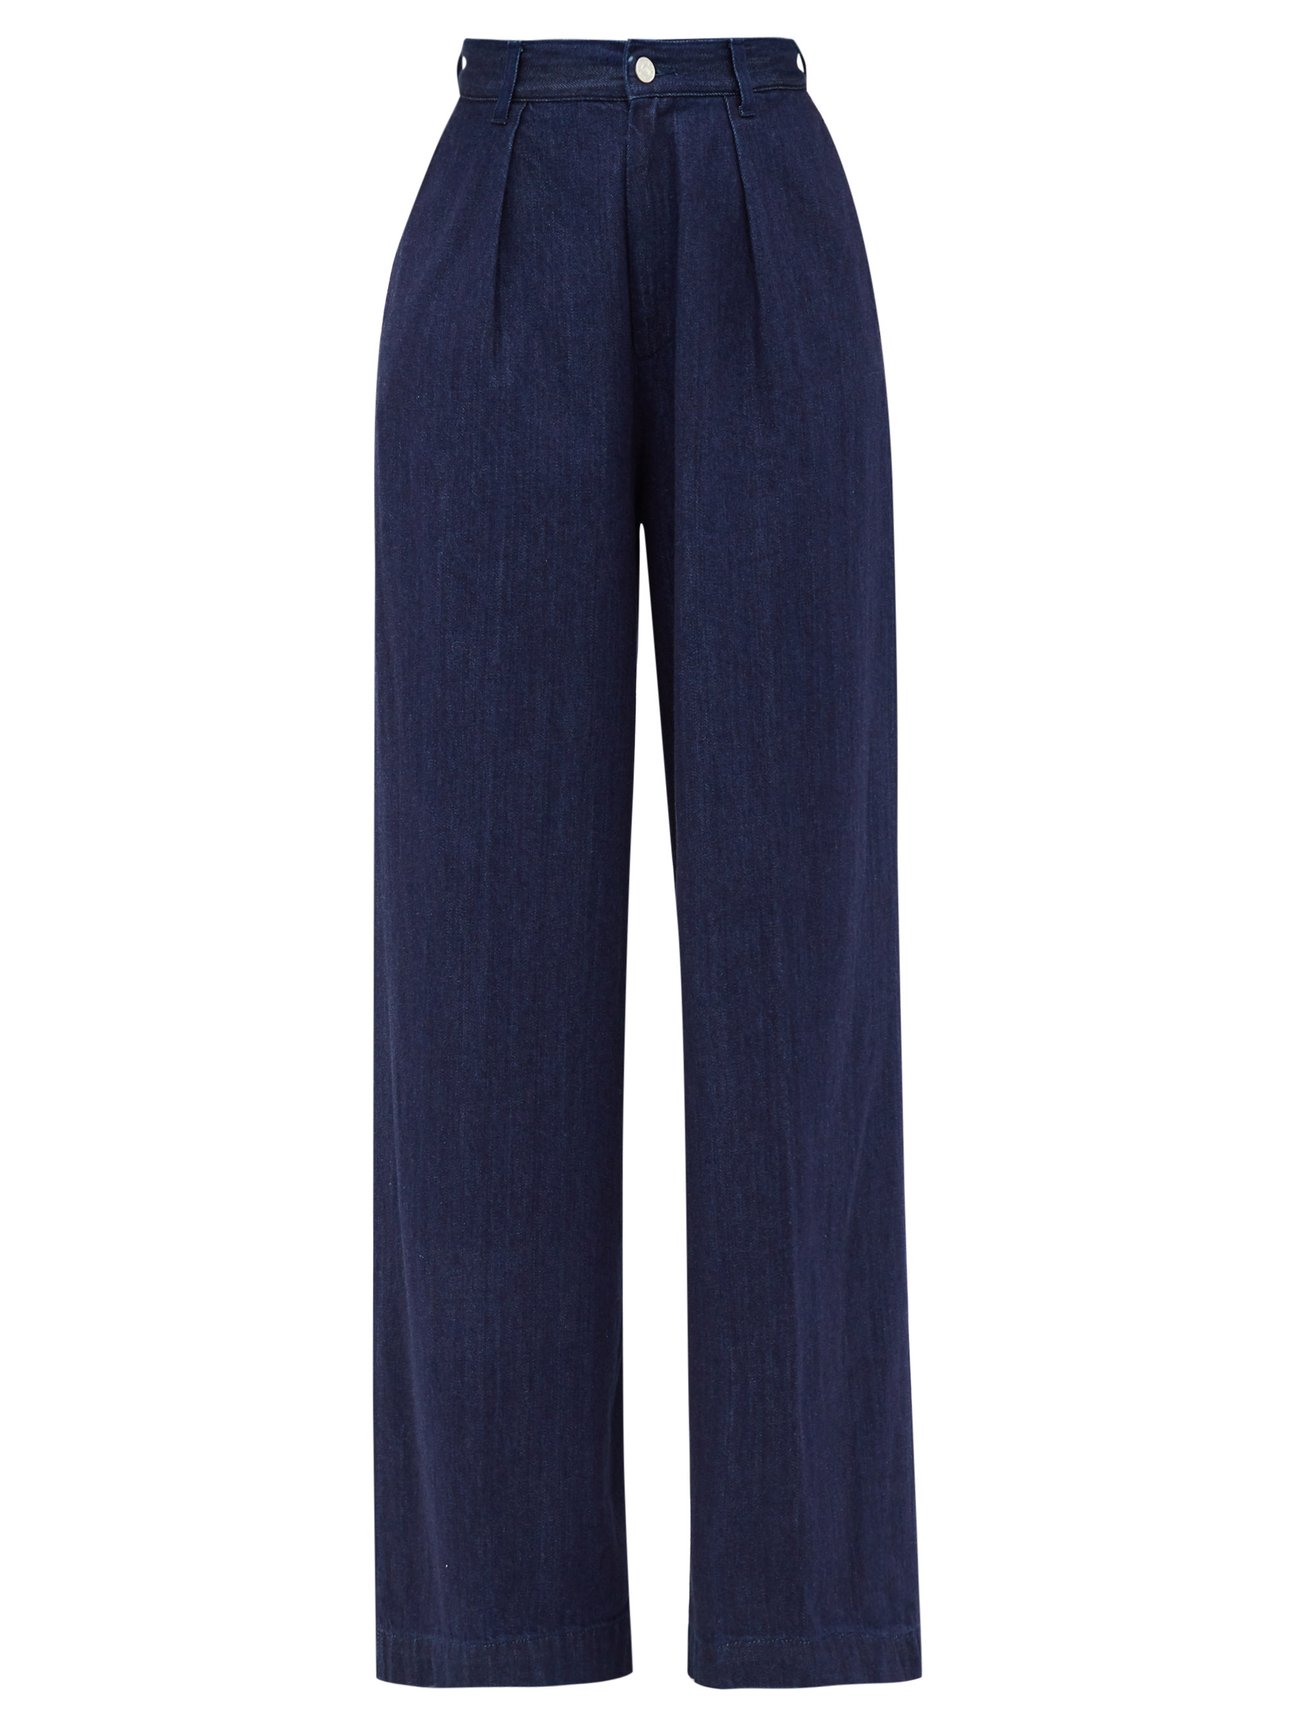 Navy Enea high-rise wide-leg jeans | Made in Tomboy | MATCHESFASHION UK